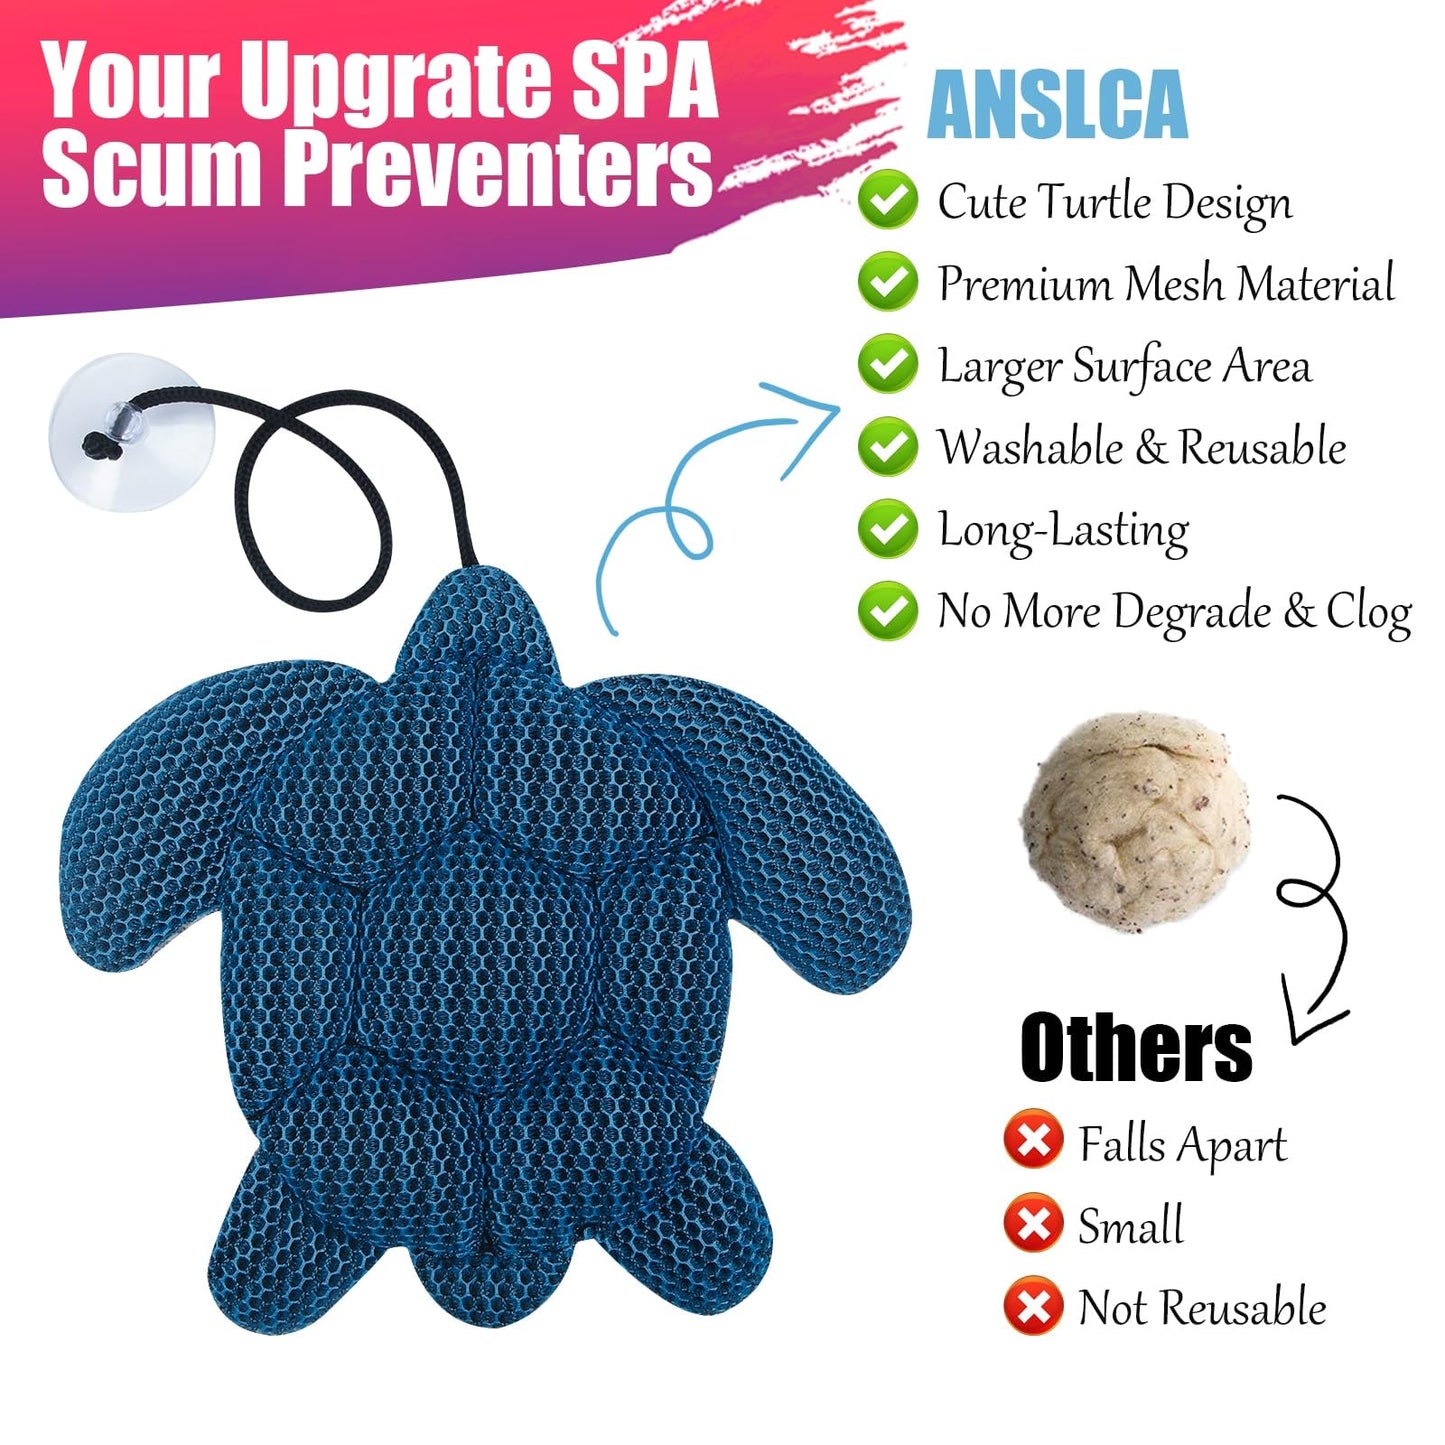 ANSLCA Hot Tub Scum Absorber, Scum Turtle Hot Tub Cleaner Hot Tub Sponges to Soak up Oils- Must Have Hot Tub Accessories for Adults Hot Tub Scum Sponge- Keeps Your Hot Tub Water Clean and Clear